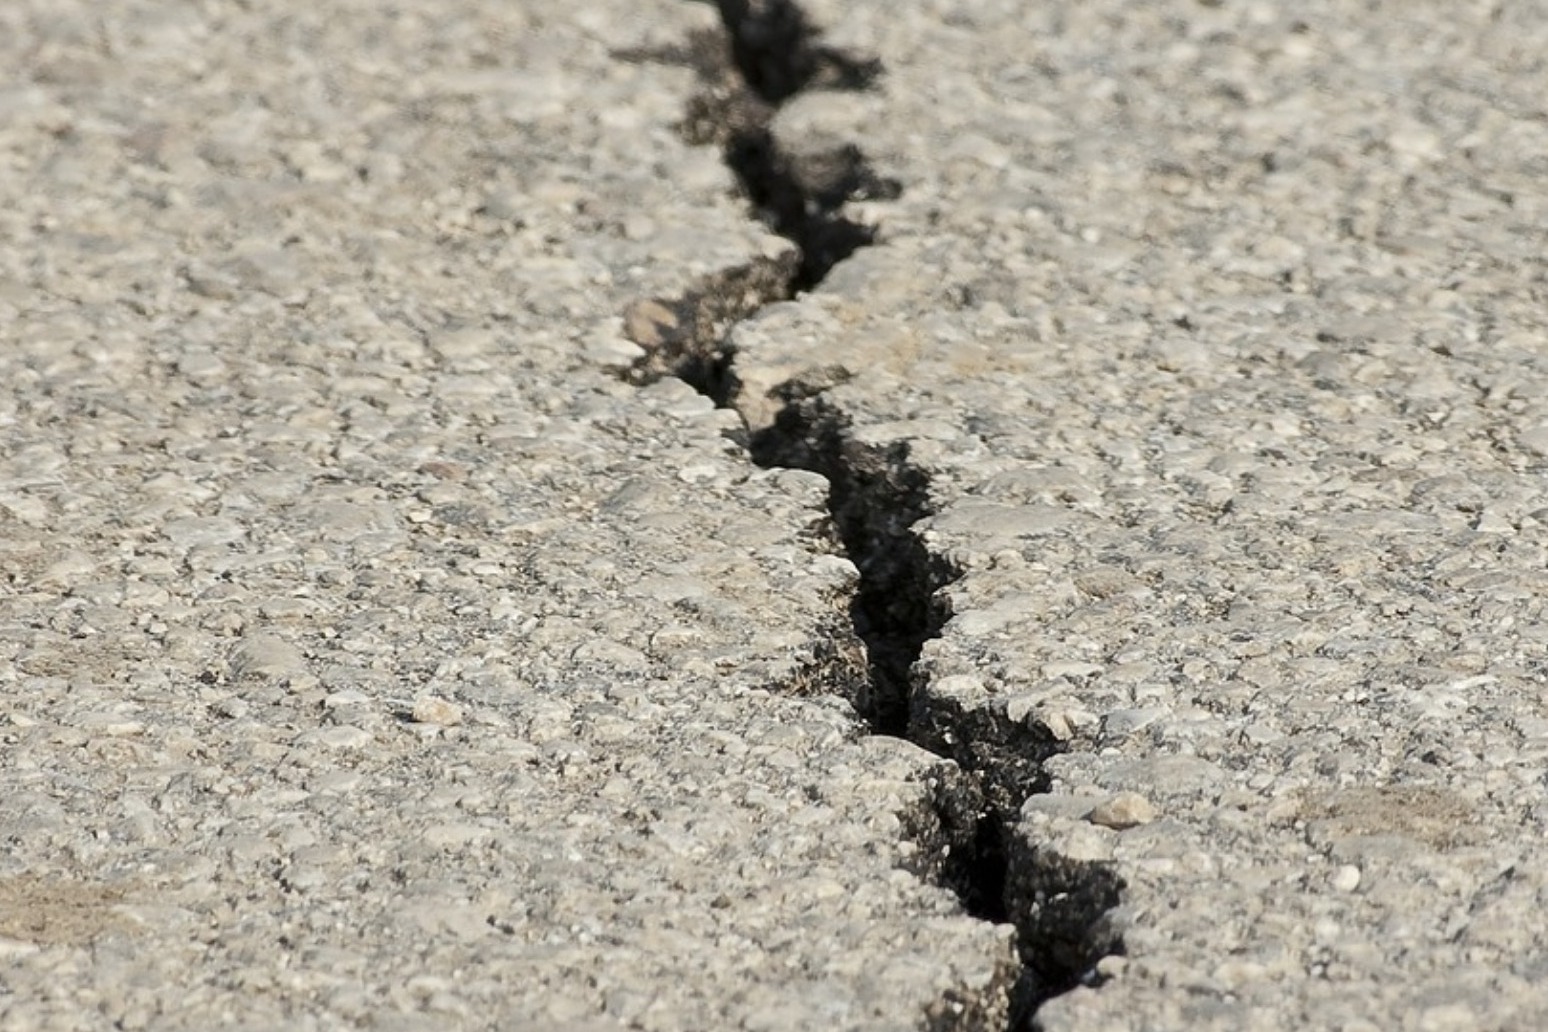 Earth tremors felt in Lincolnshire and Yorkshire 